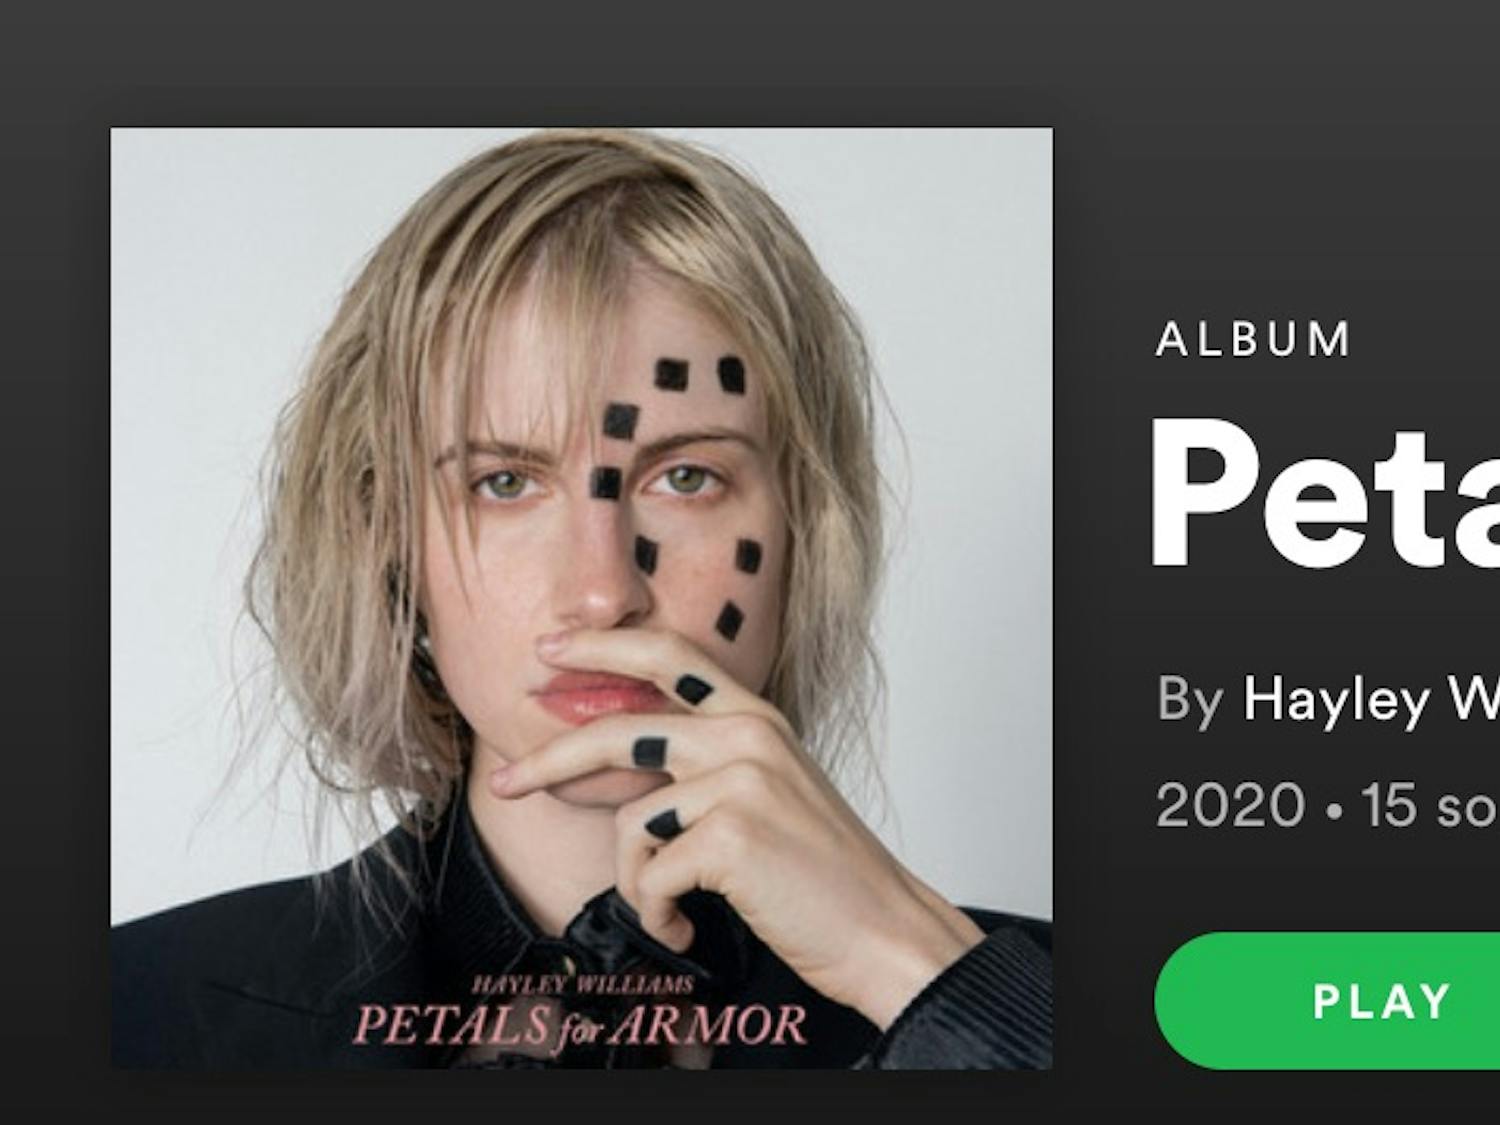 On “Petals for Armor,” songs like “Over Yet” and “Pure Love” evoke the ’80s synth-fueled shades of Paramore’s 2017 album “After Laughter.”